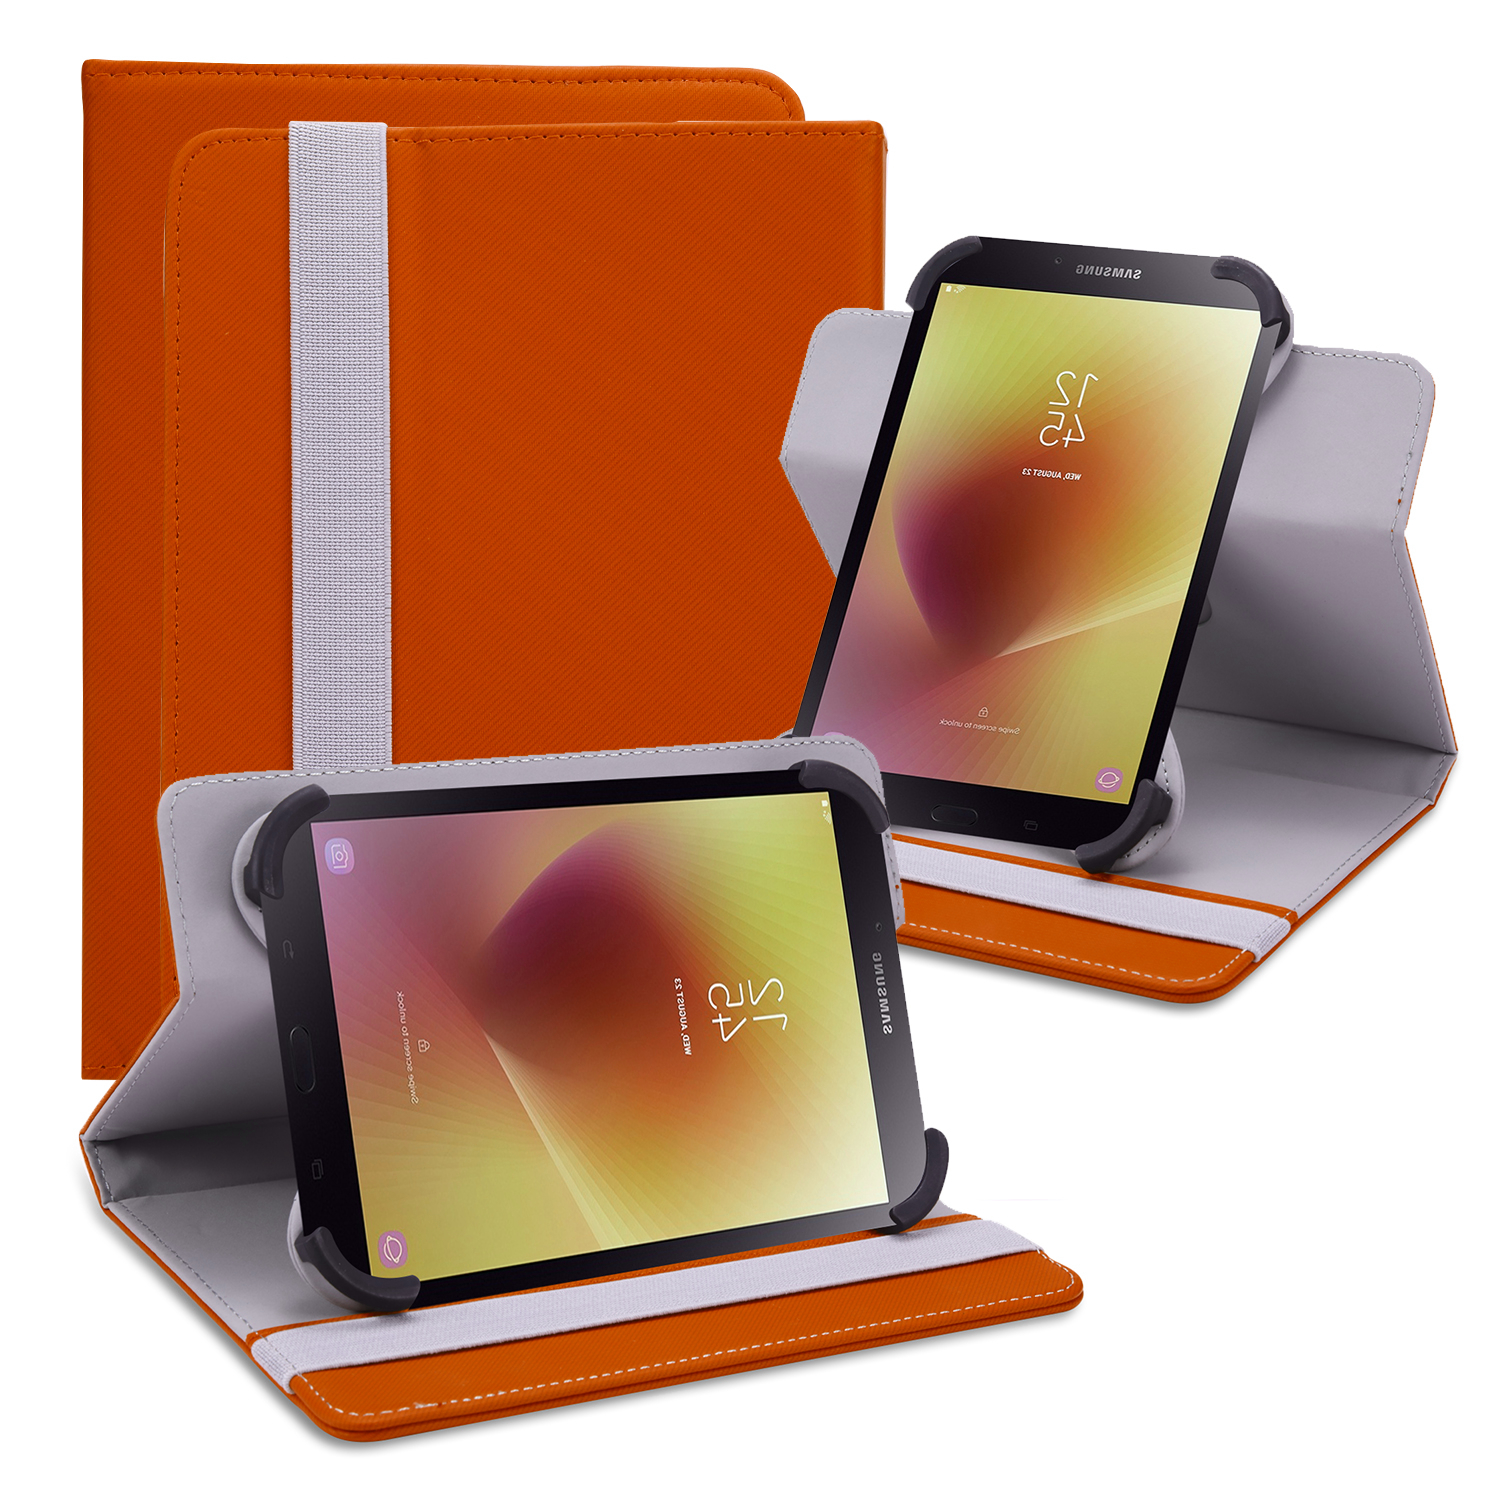 Universal-Protective-Leather-Cover-Stand-Case for Universal 10 Inches Tablets (Orange)